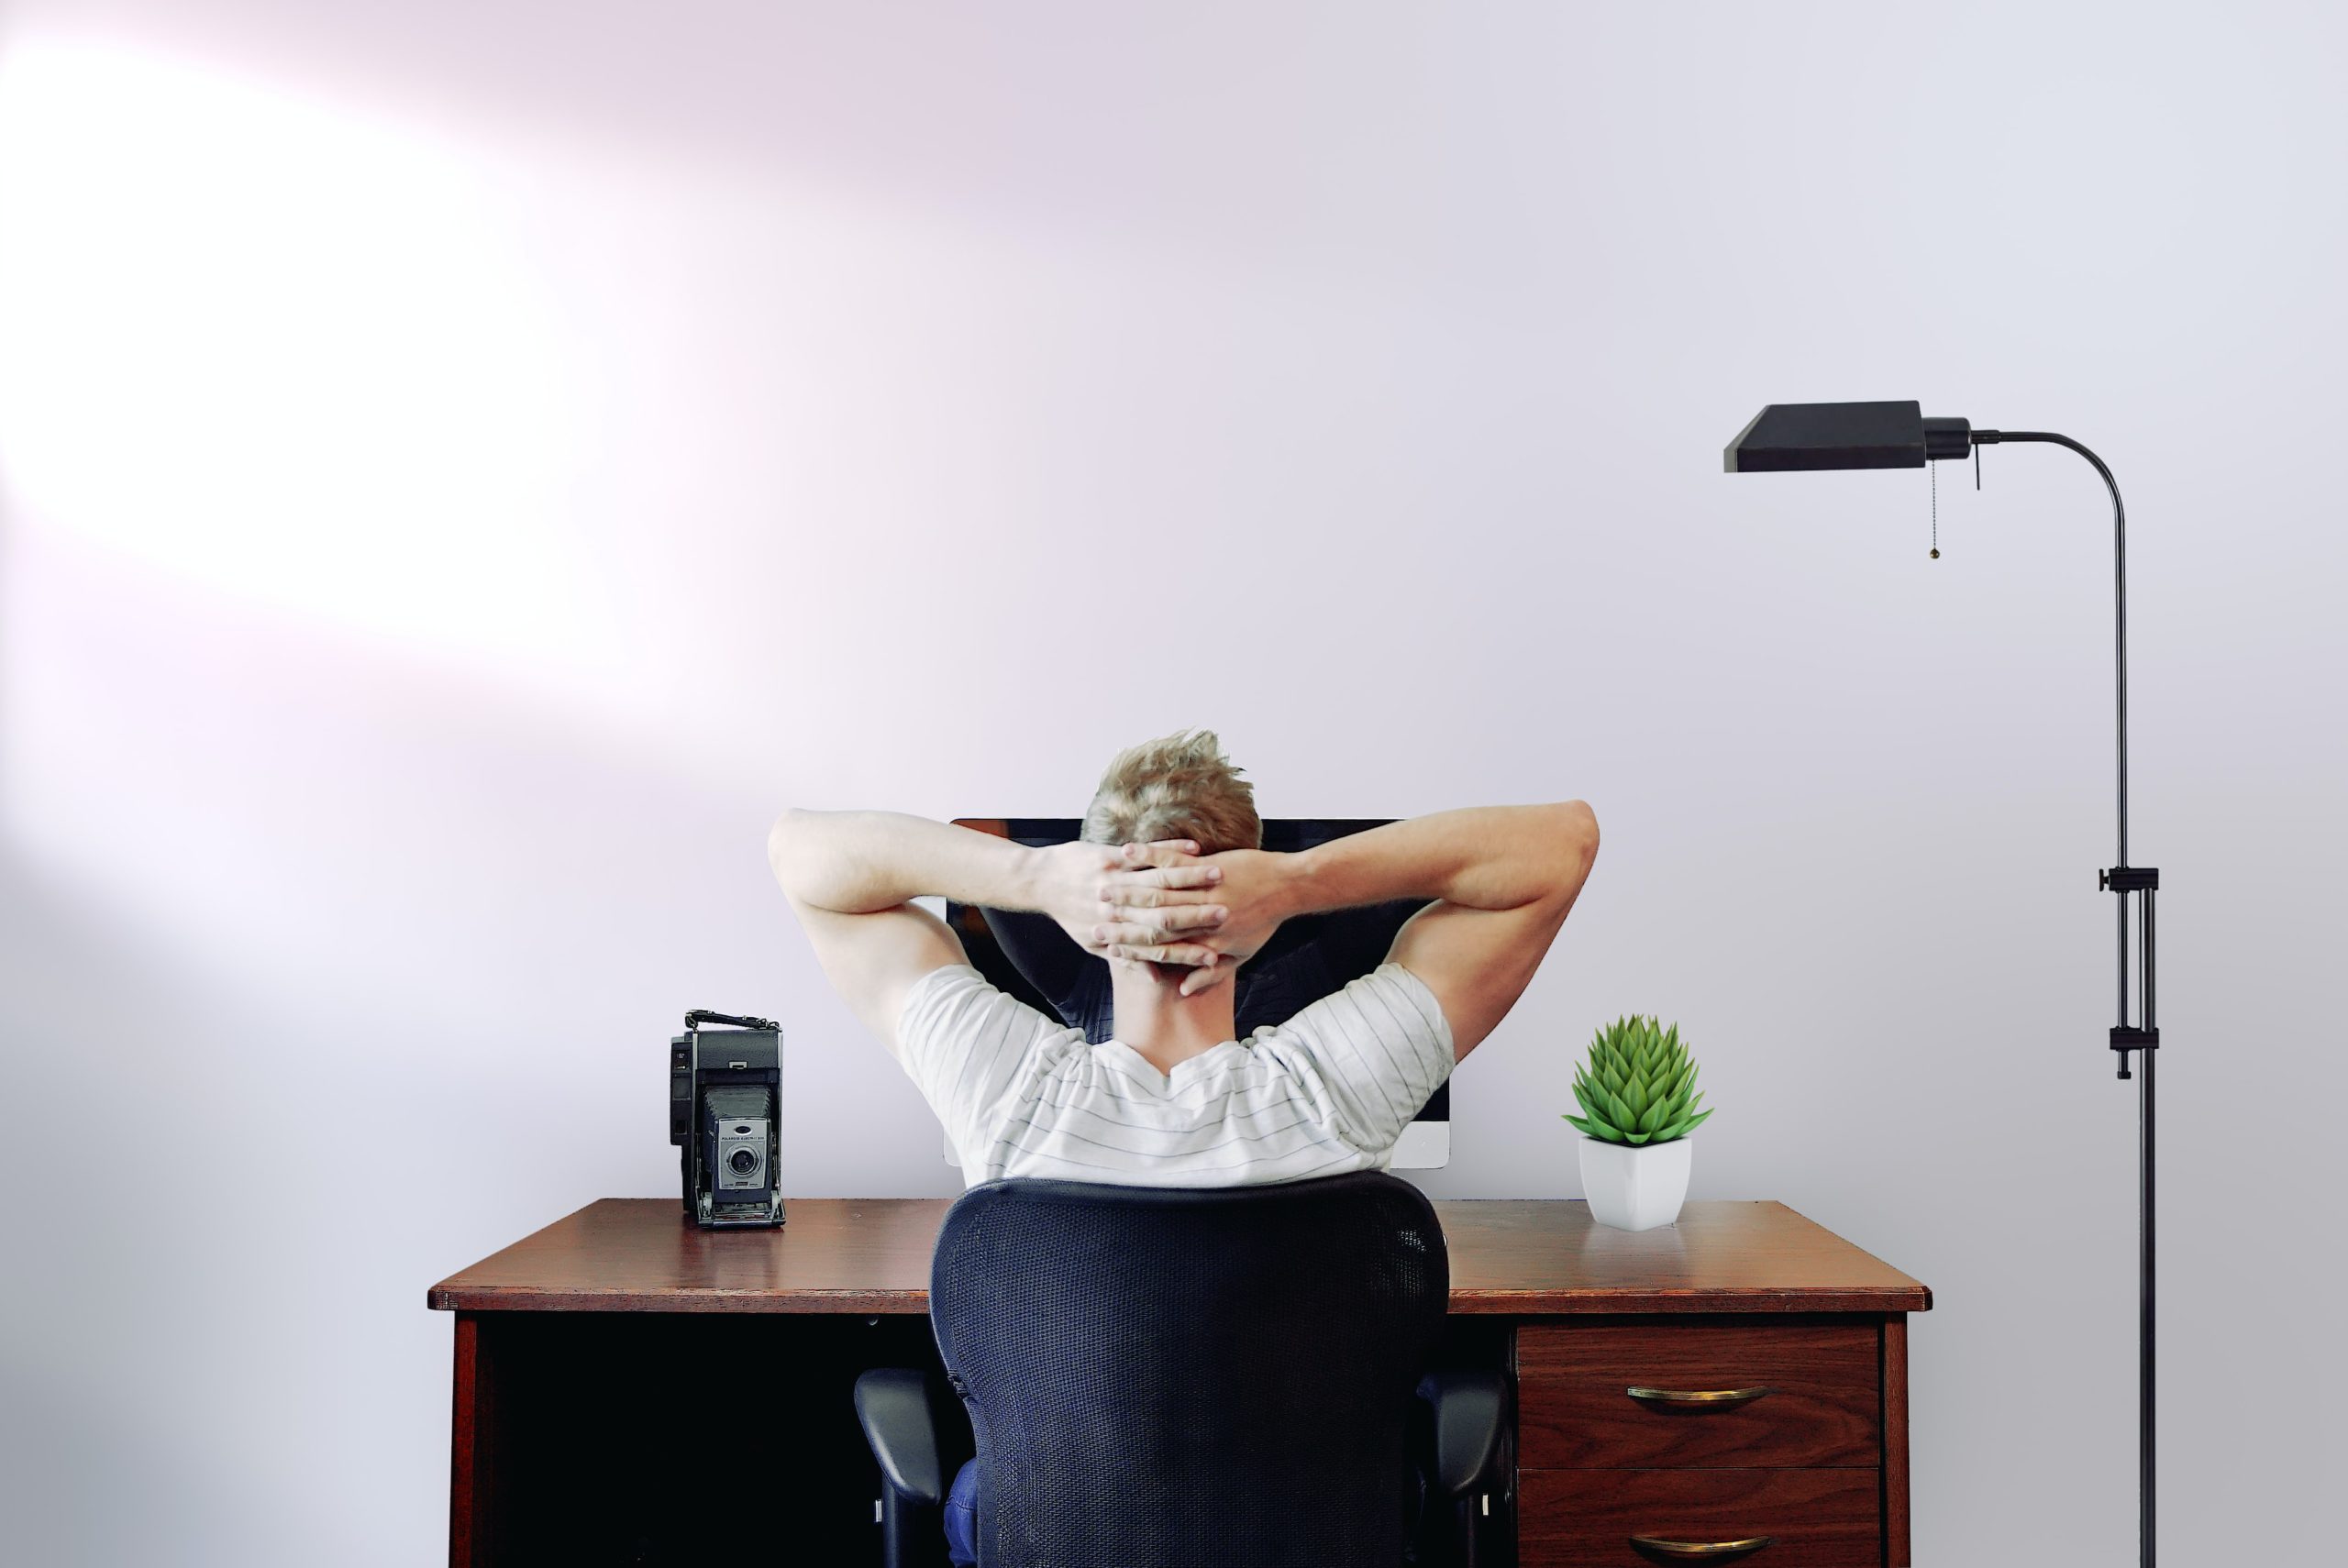 person sitting in front of computer with their hand on their head in a relaxed position